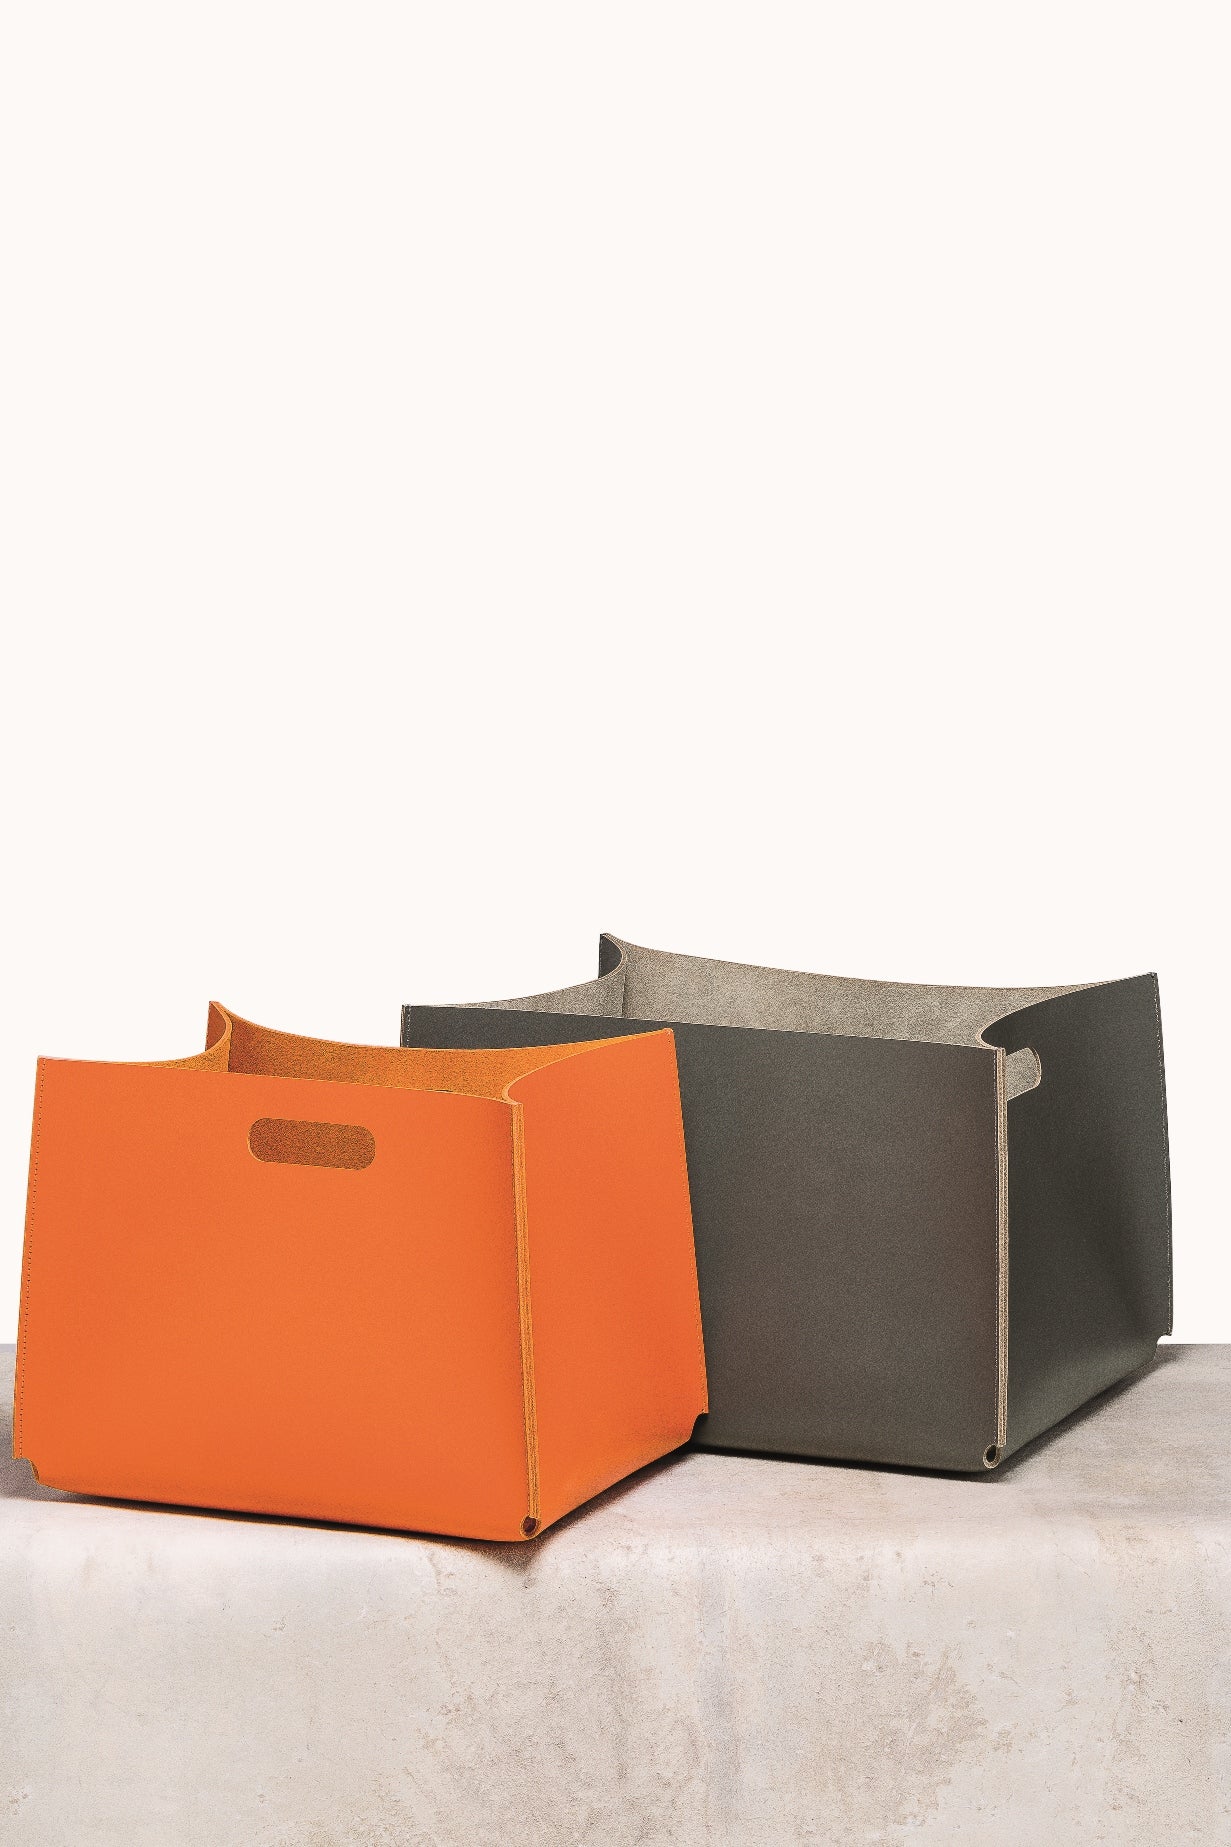 Rabitti 1969 Amsterdam Classic Saddle Leather Storage Baskets With Handles | Elegant and Functional Storage Solution | Crafted with High-Quality Saddle Leather | Handles for Convenient Use | Explore a Range of Luxury Home Accessories at 2Jour Concierge, #1 luxury high-end gift & lifestyle shop